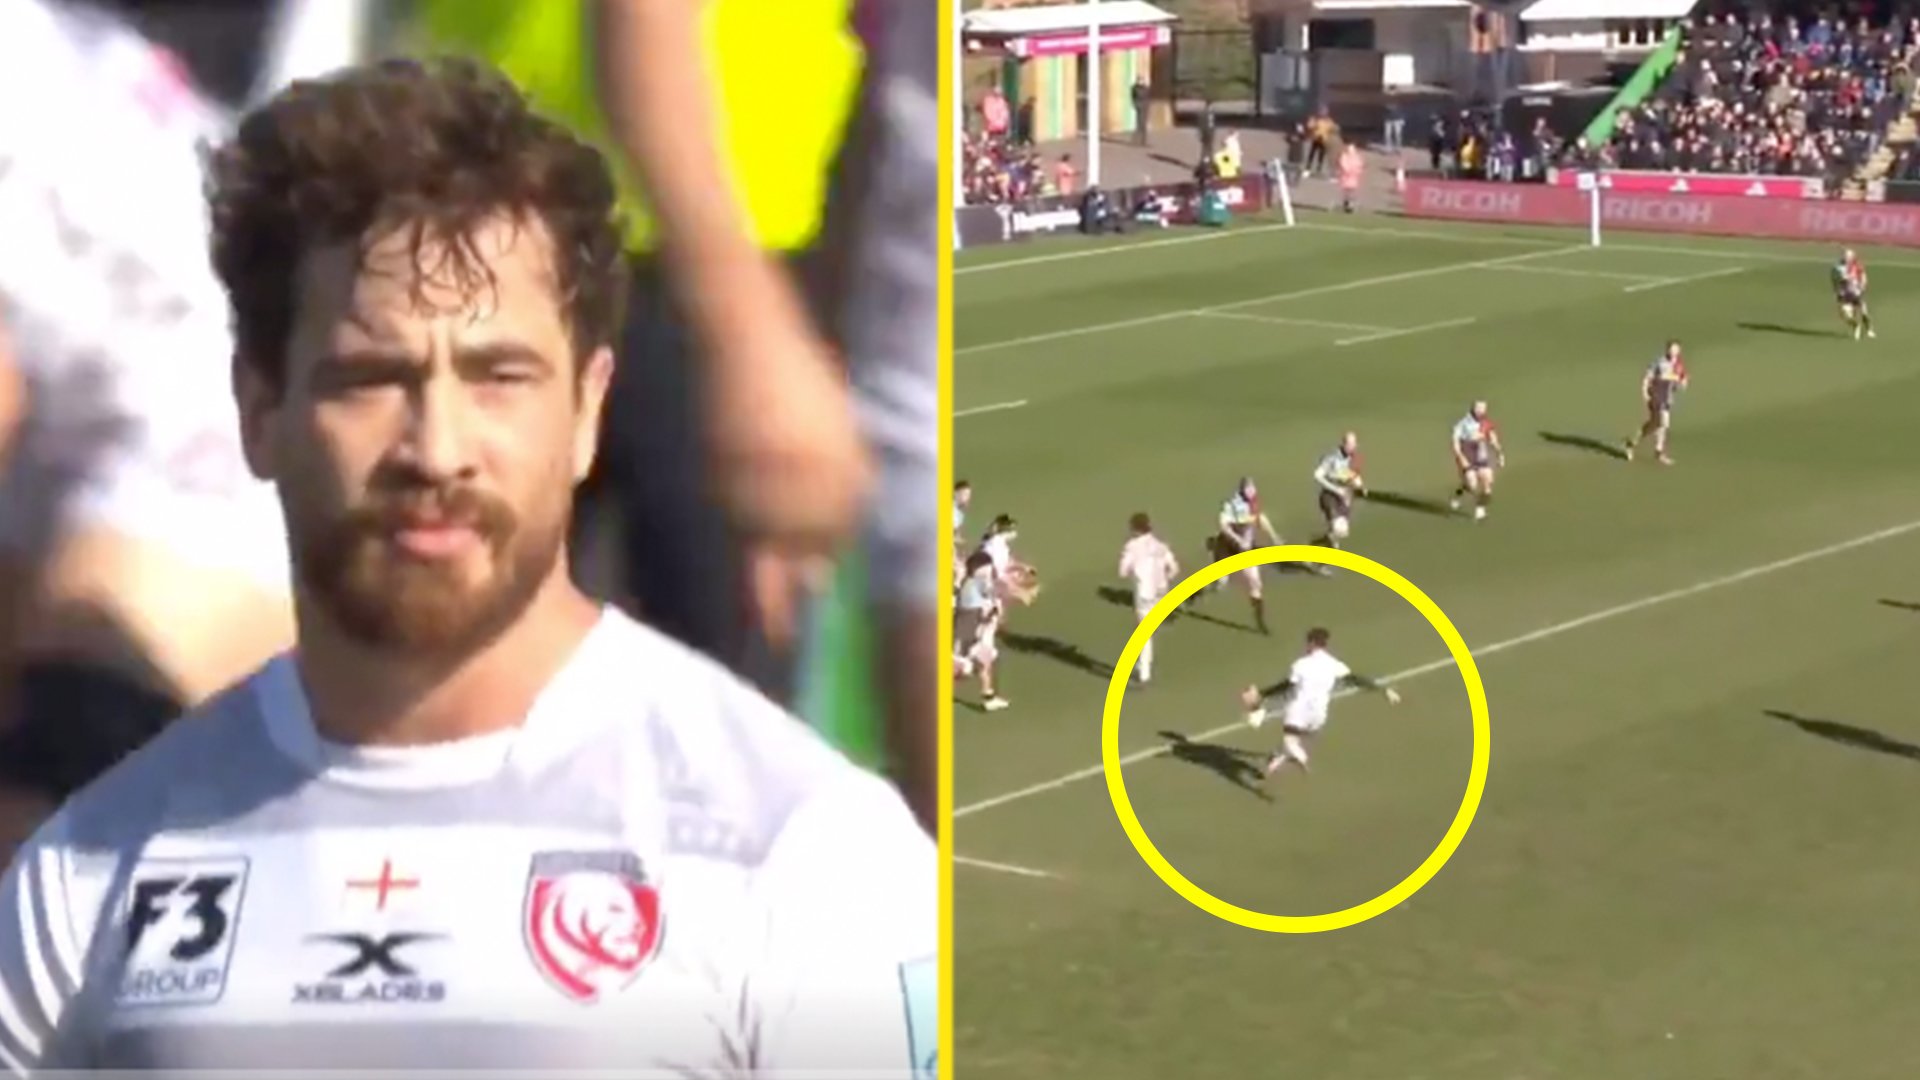 New footage is proof that Danny Cipriani's black magic kick was not a fluke